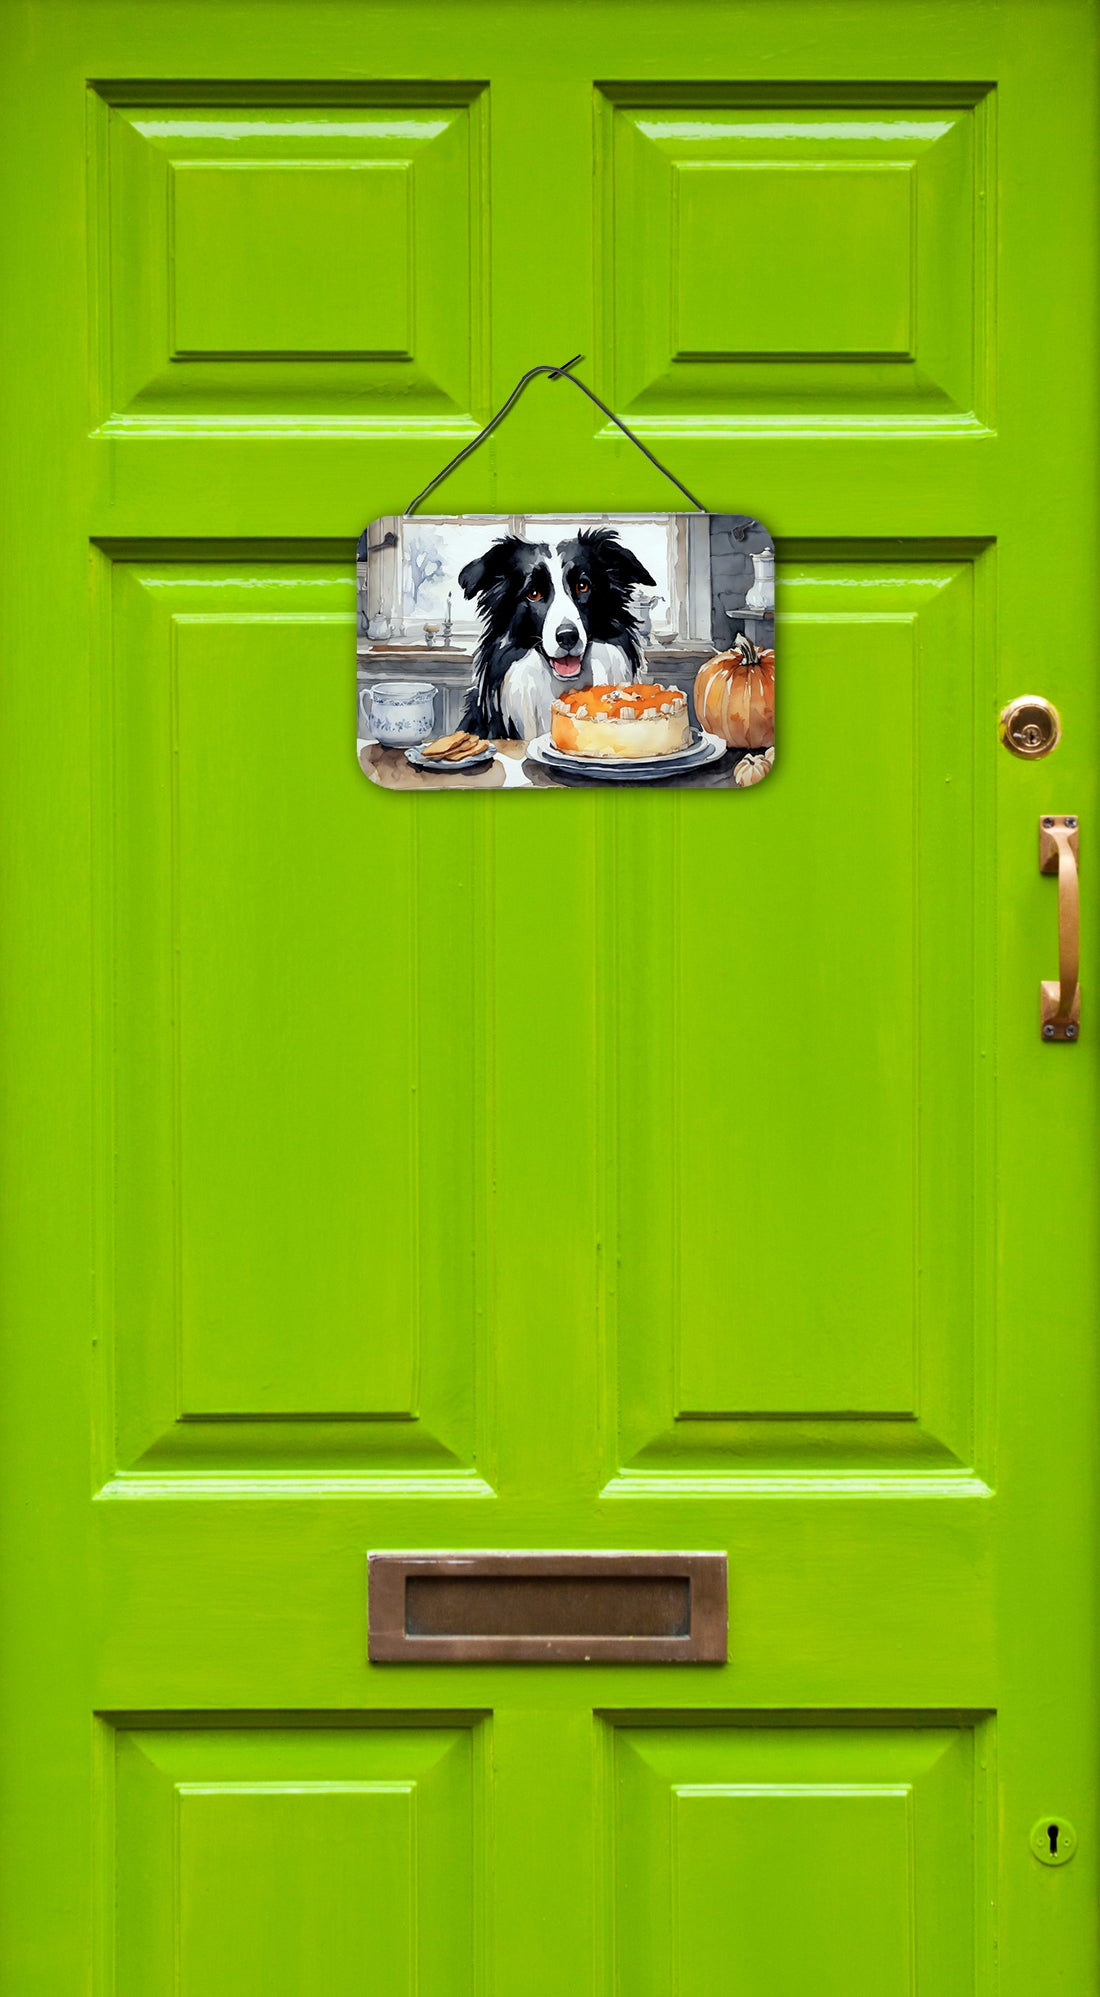 Buy this Border Collie Fall Kitchen Pumpkins Wall or Door Hanging Prints